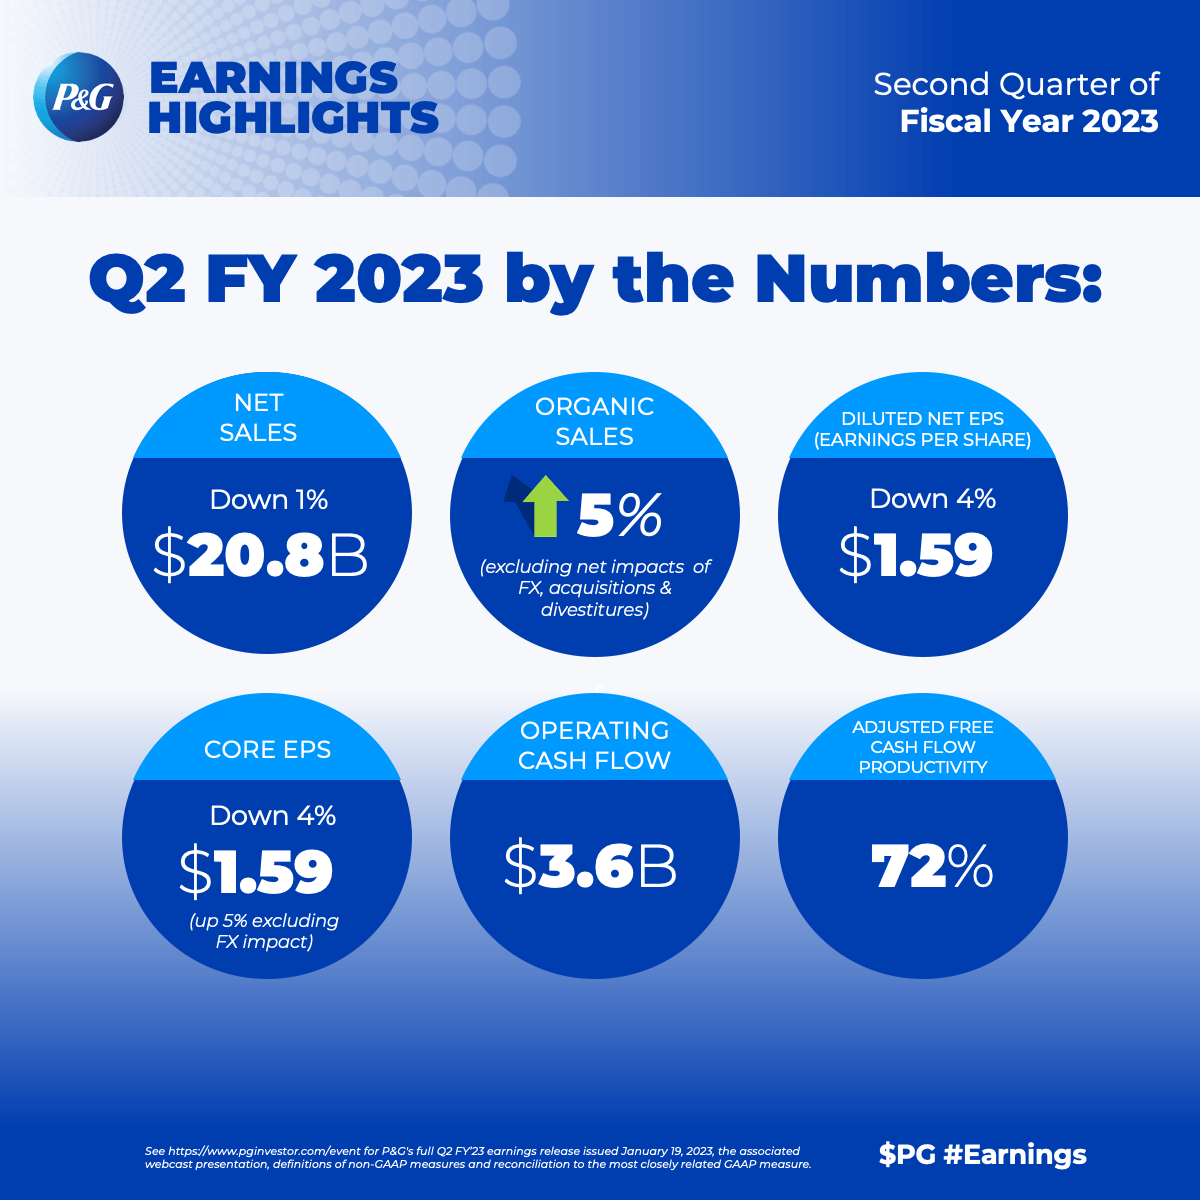 P&G Results for Second Quarter of Fiscal Year 2023